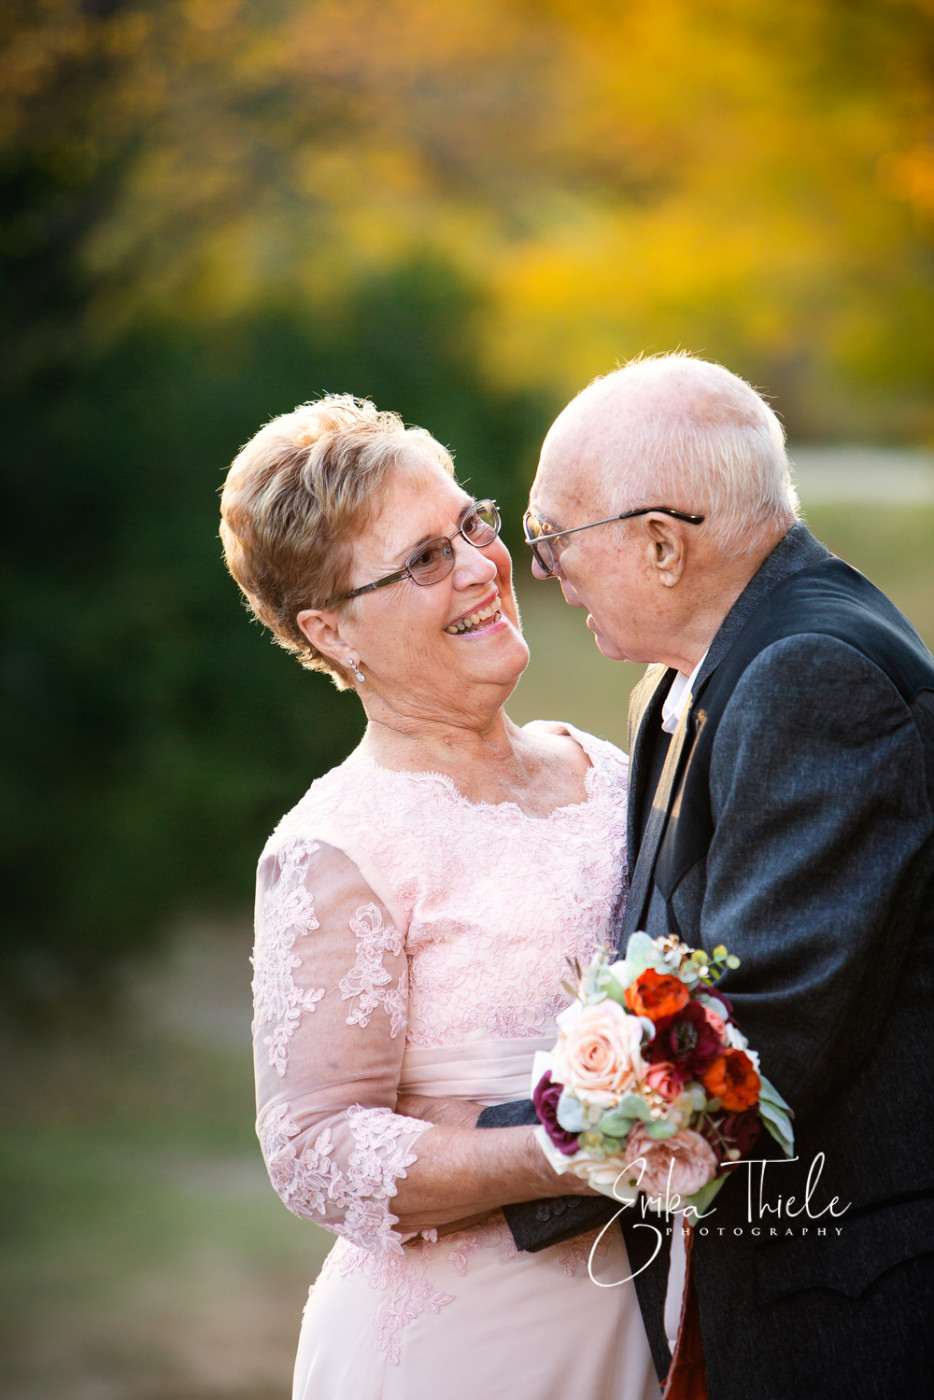 The Epley Family  |  A 50th Wedding Anniversary Session 